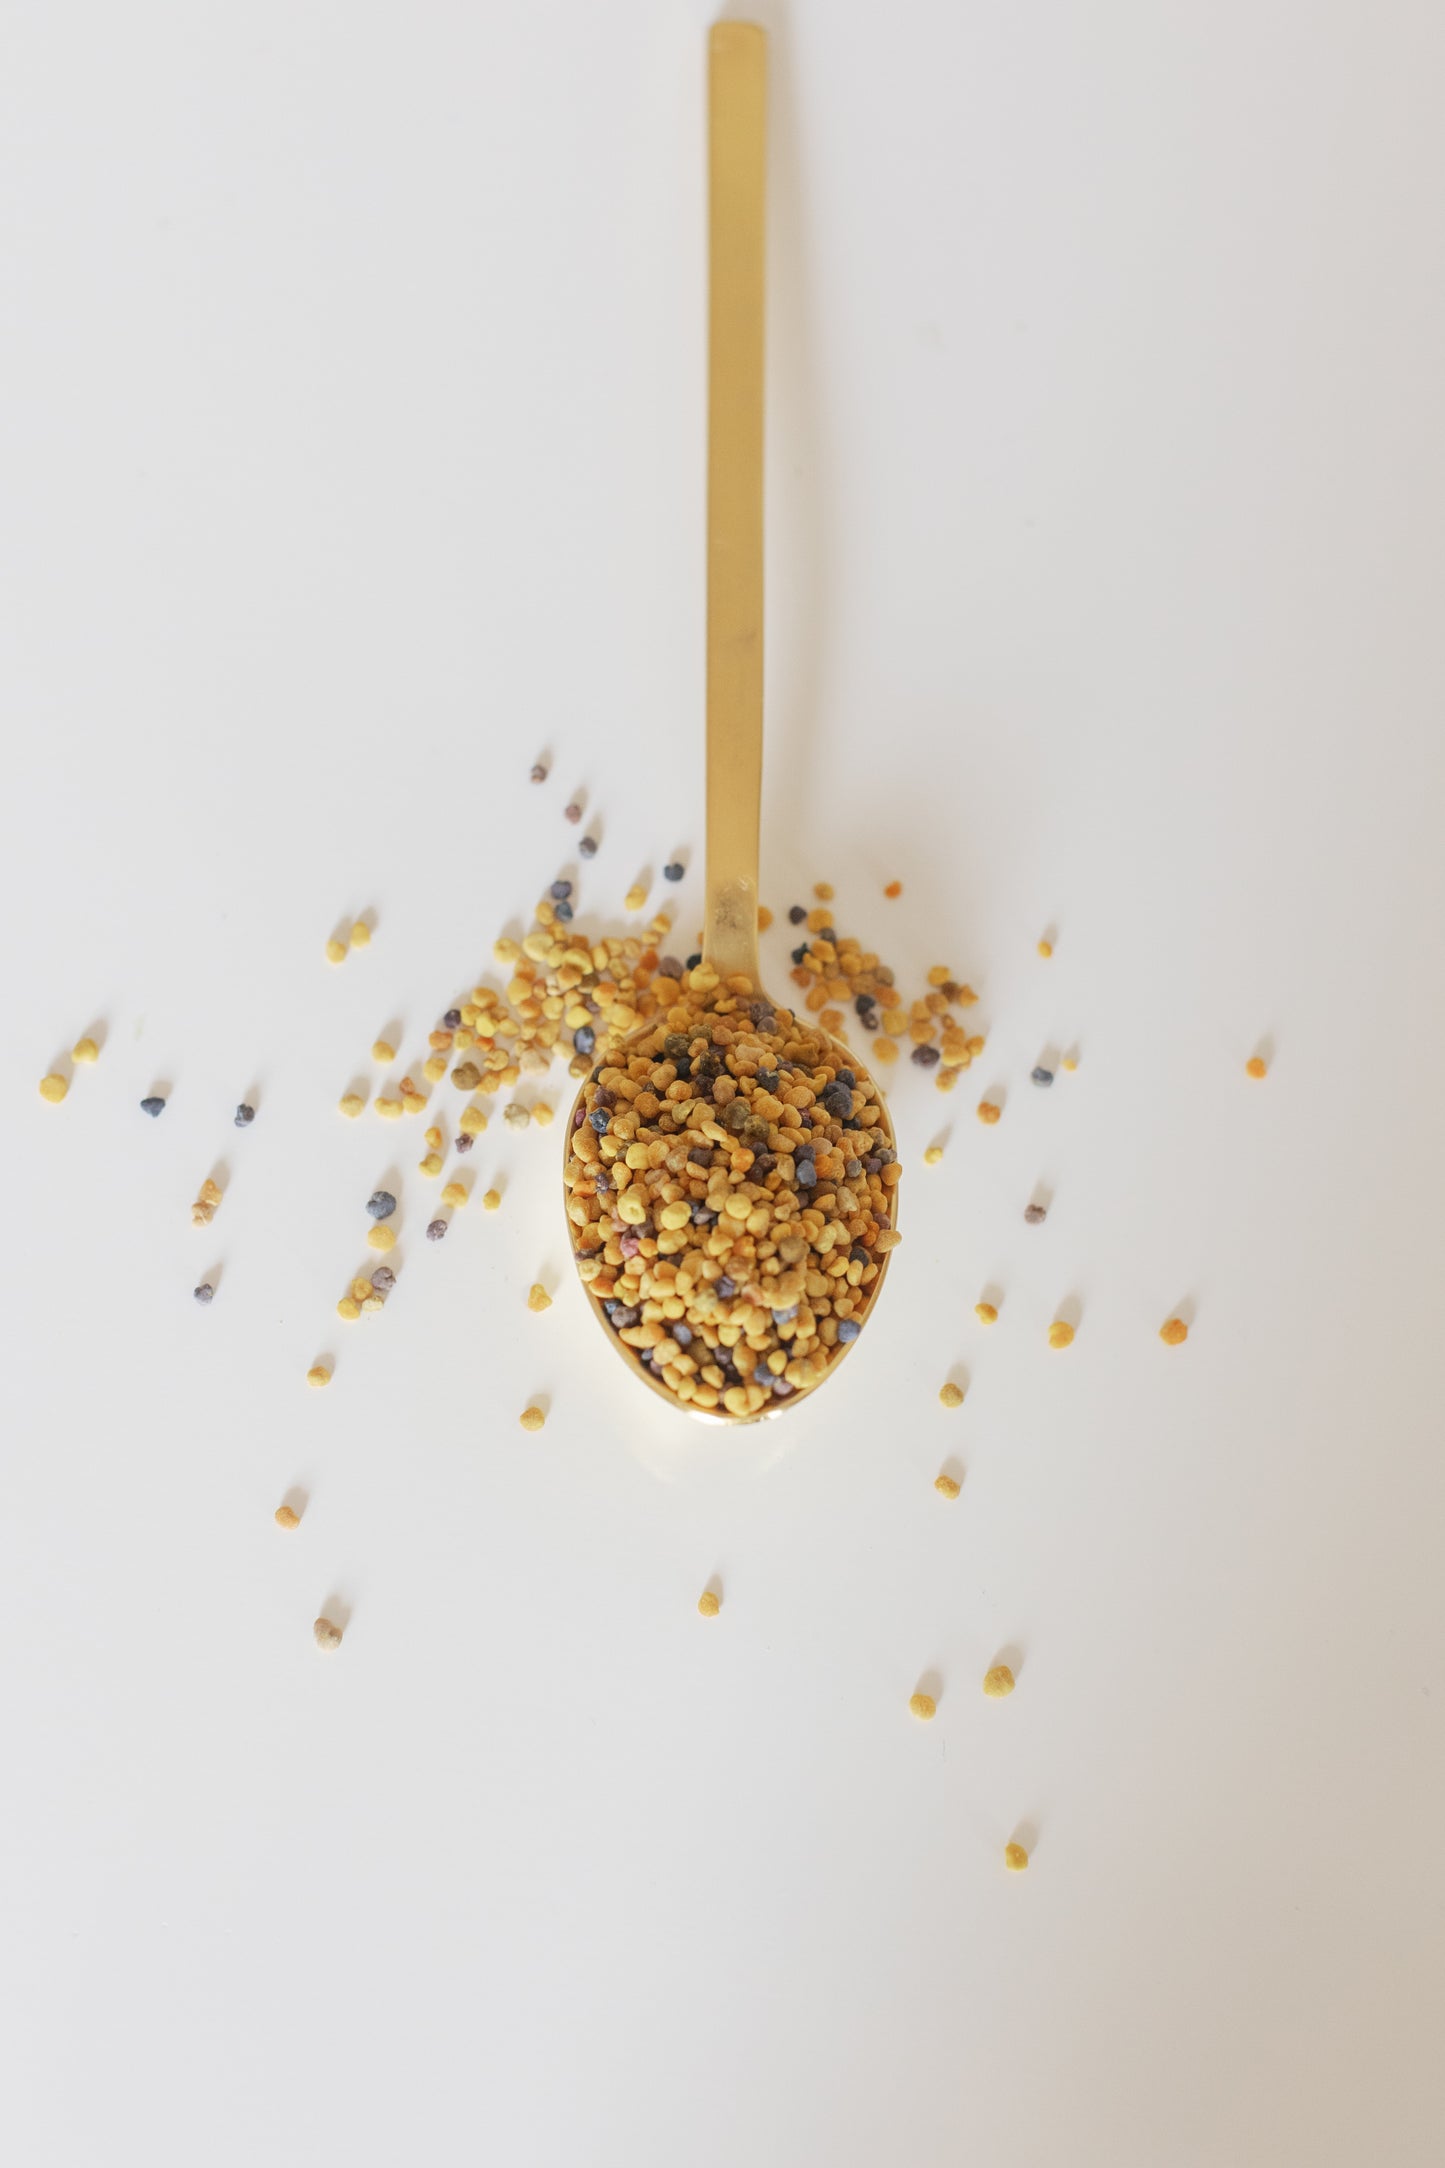 Picture of a spoon full of Bee Pollen